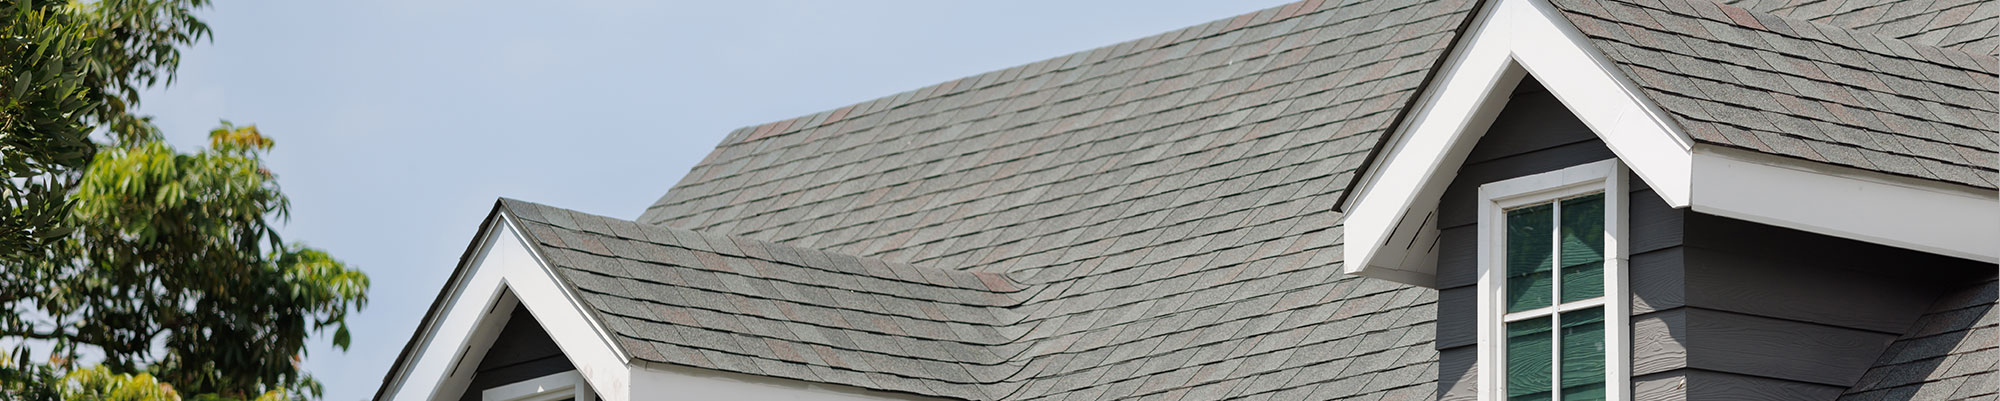 Kneeland roof replacement company